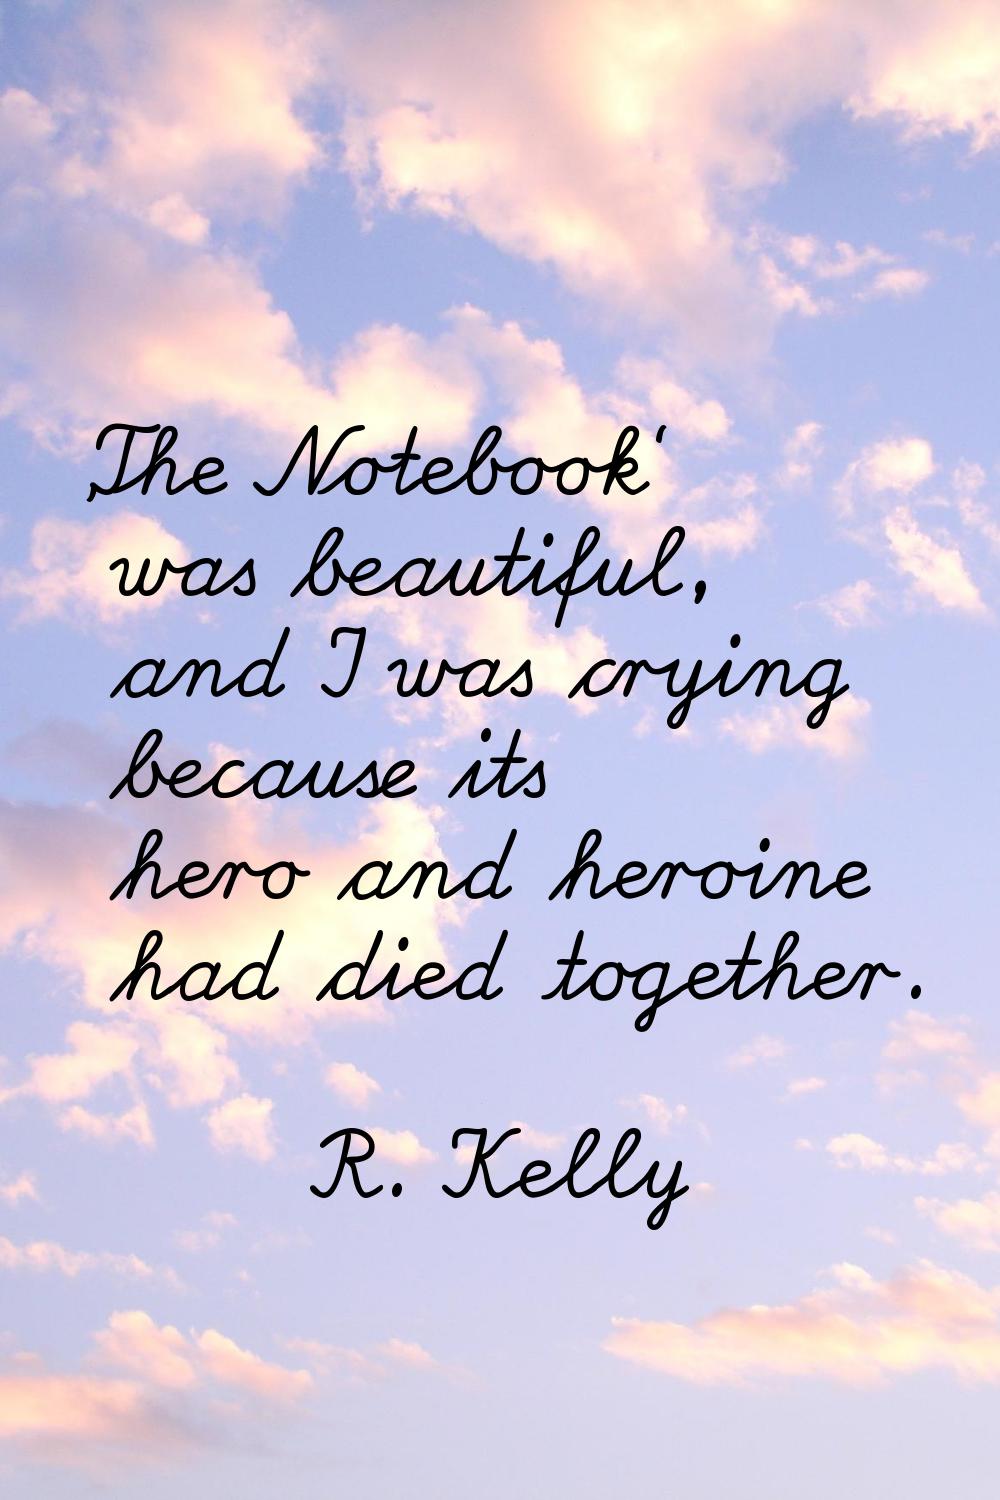 'The Notebook' was beautiful, and I was crying because its hero and heroine had died together.